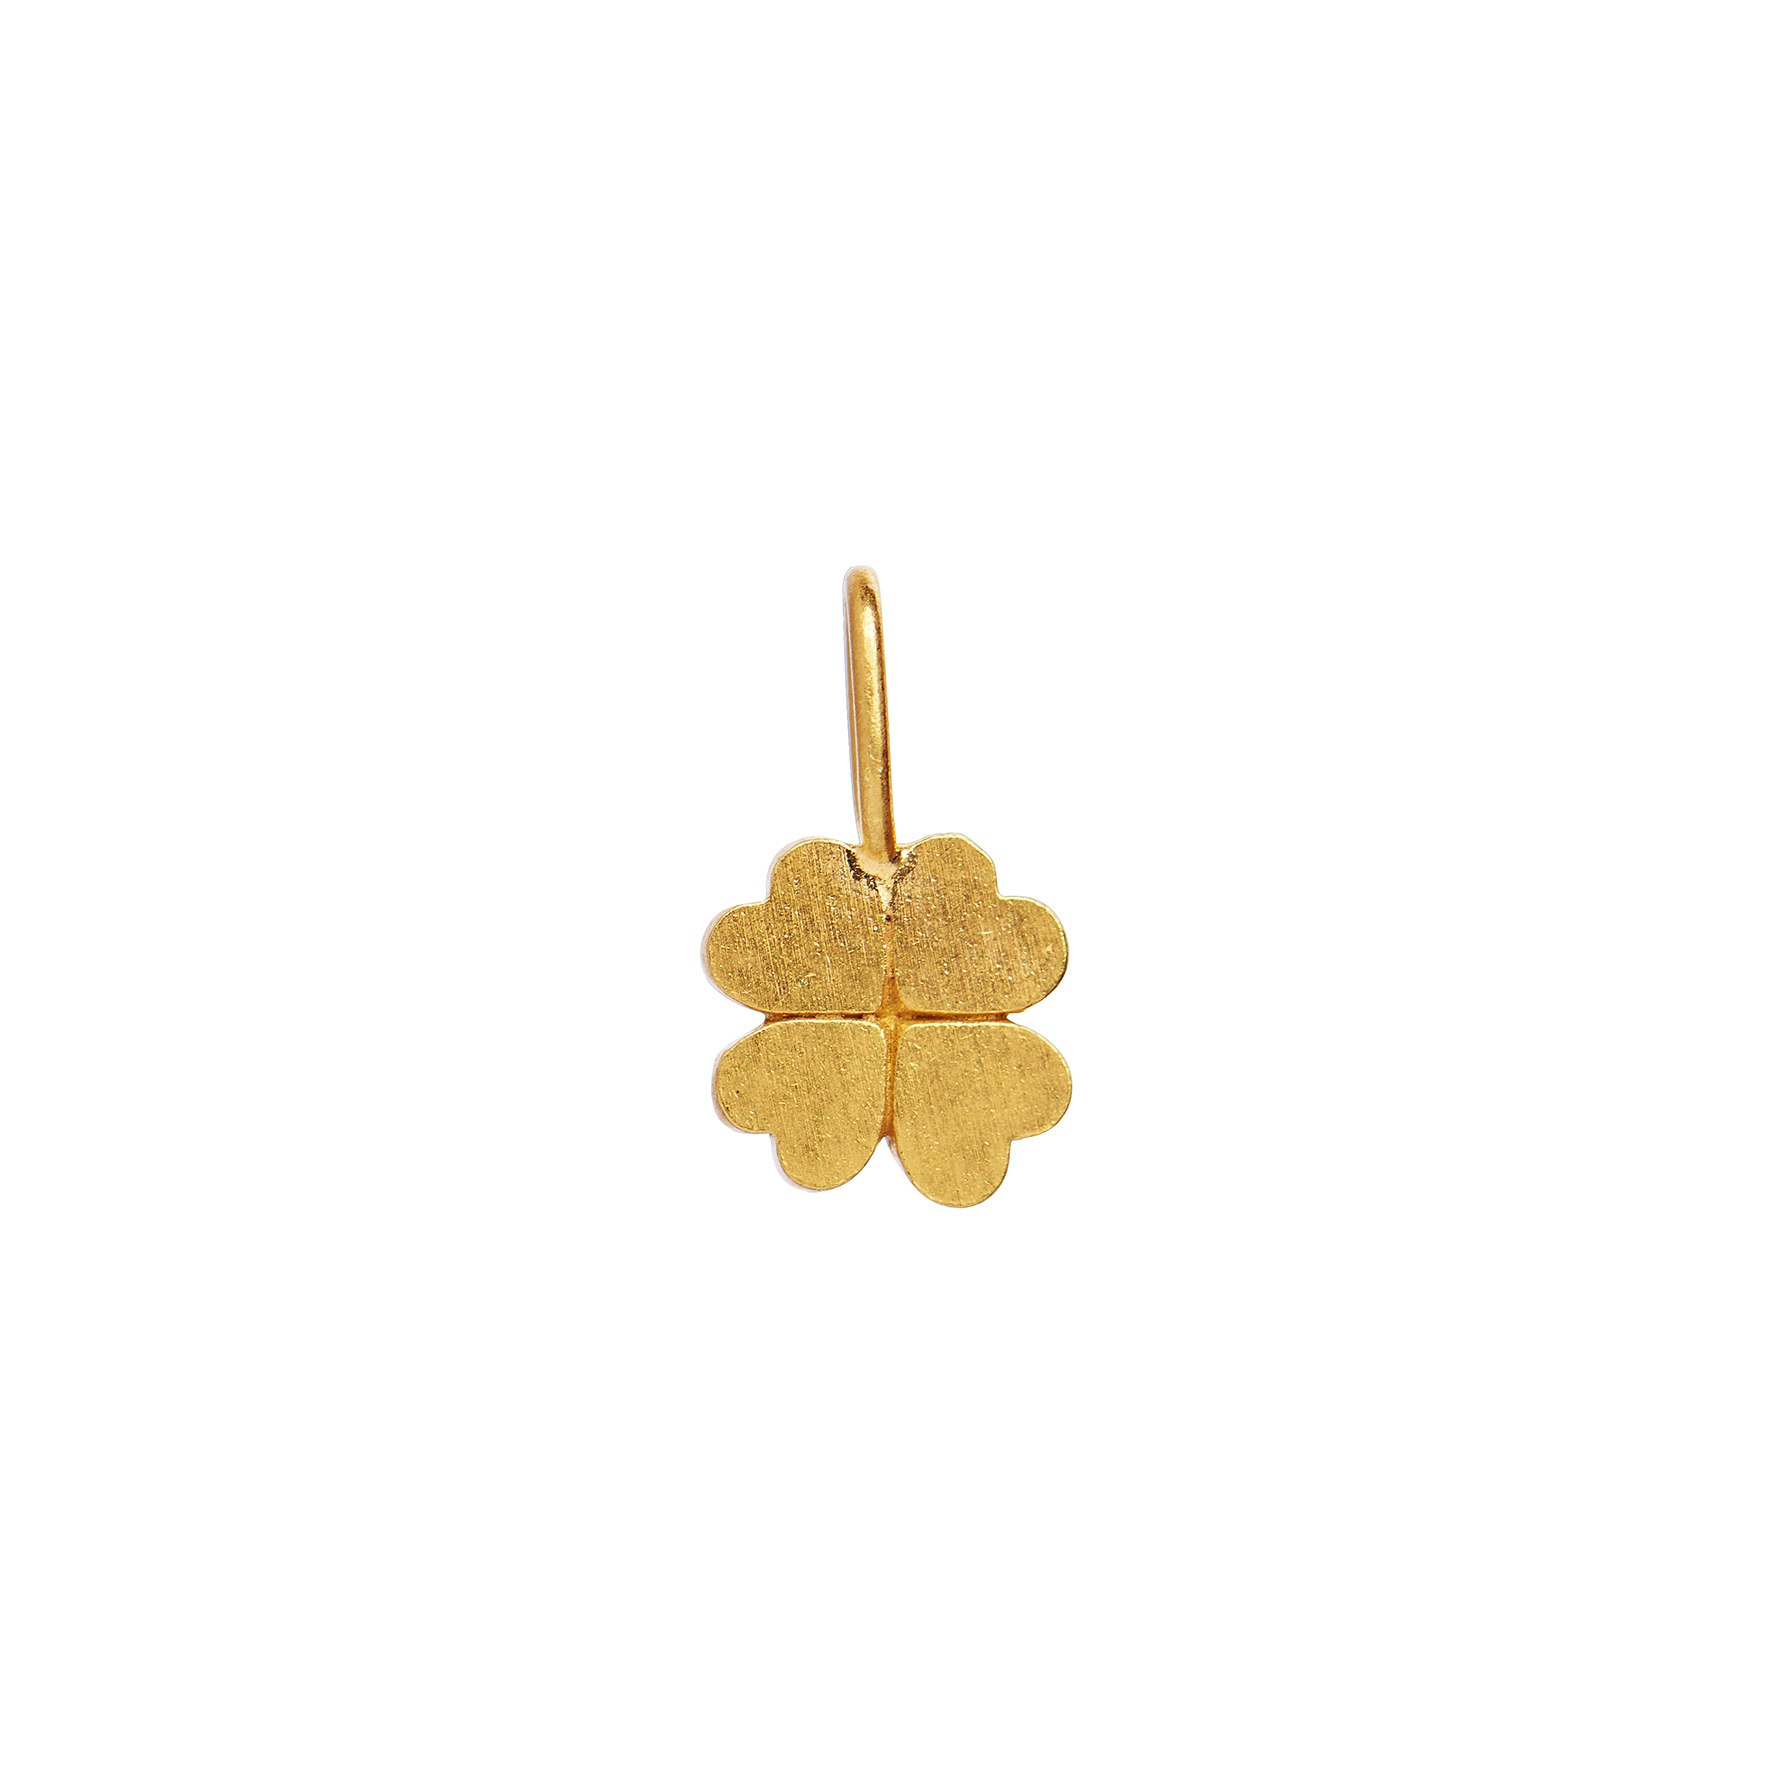 Petit Clover Charm from STINE A Jewelry in Goldplated Silver Sterling 925